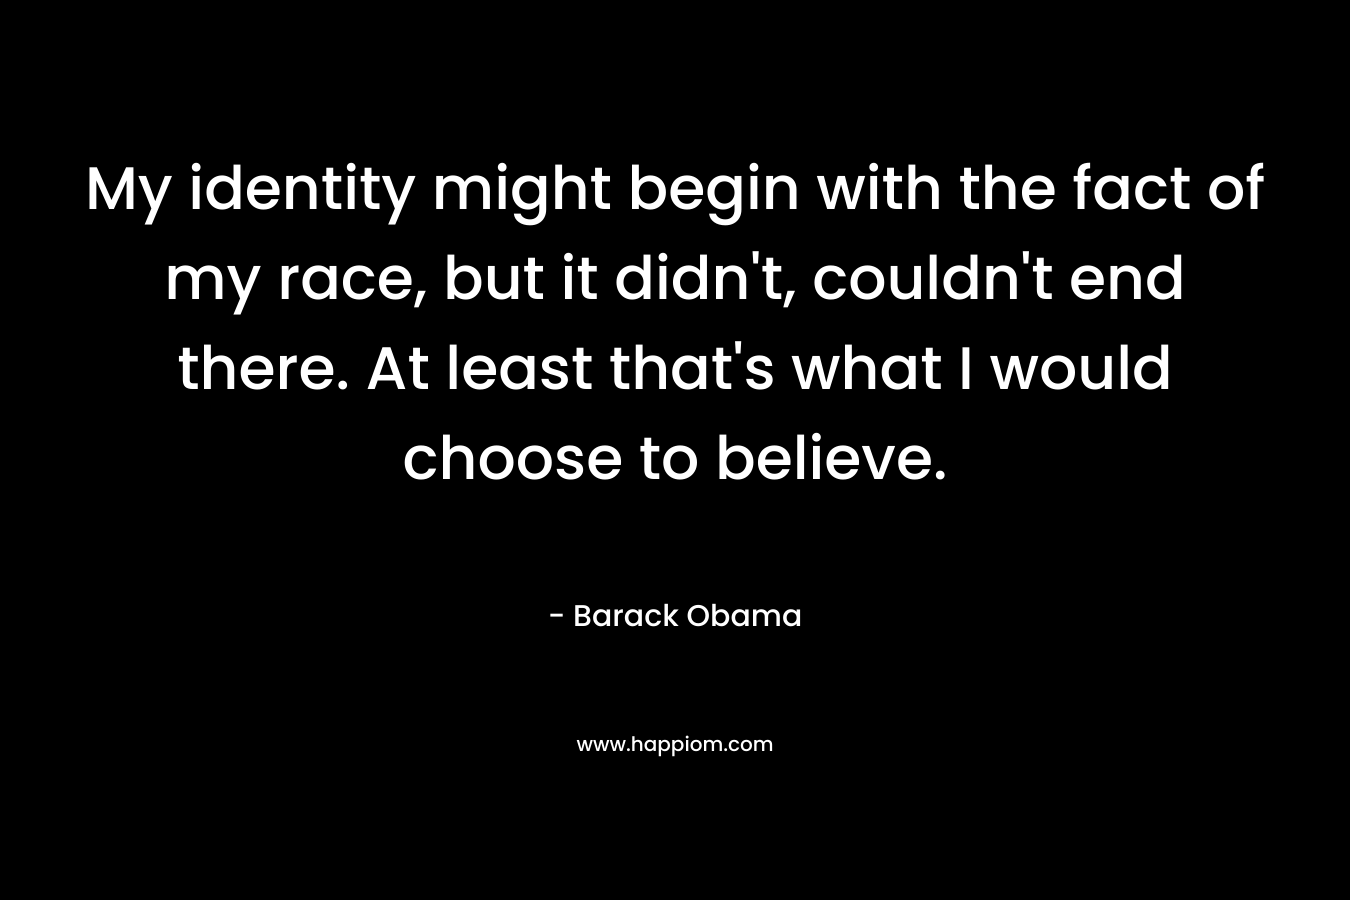 My identity might begin with the fact of my race, but it didn't, couldn't end there. At least that's what I would choose to believe.